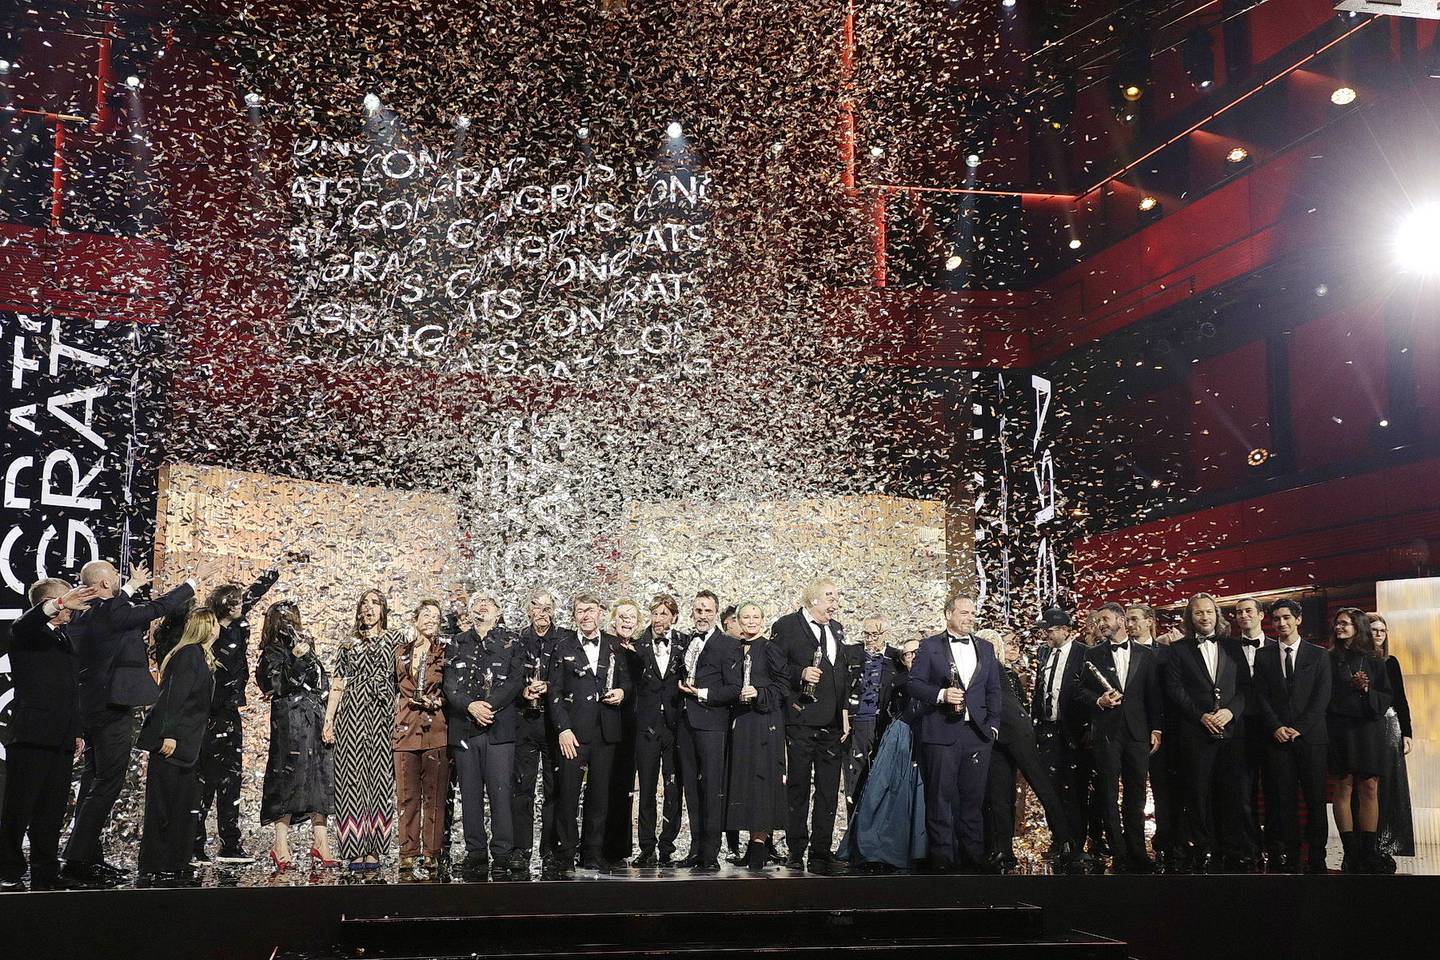 European Film Awards: Anatomy of a Fall dominates evening with landslide of wins